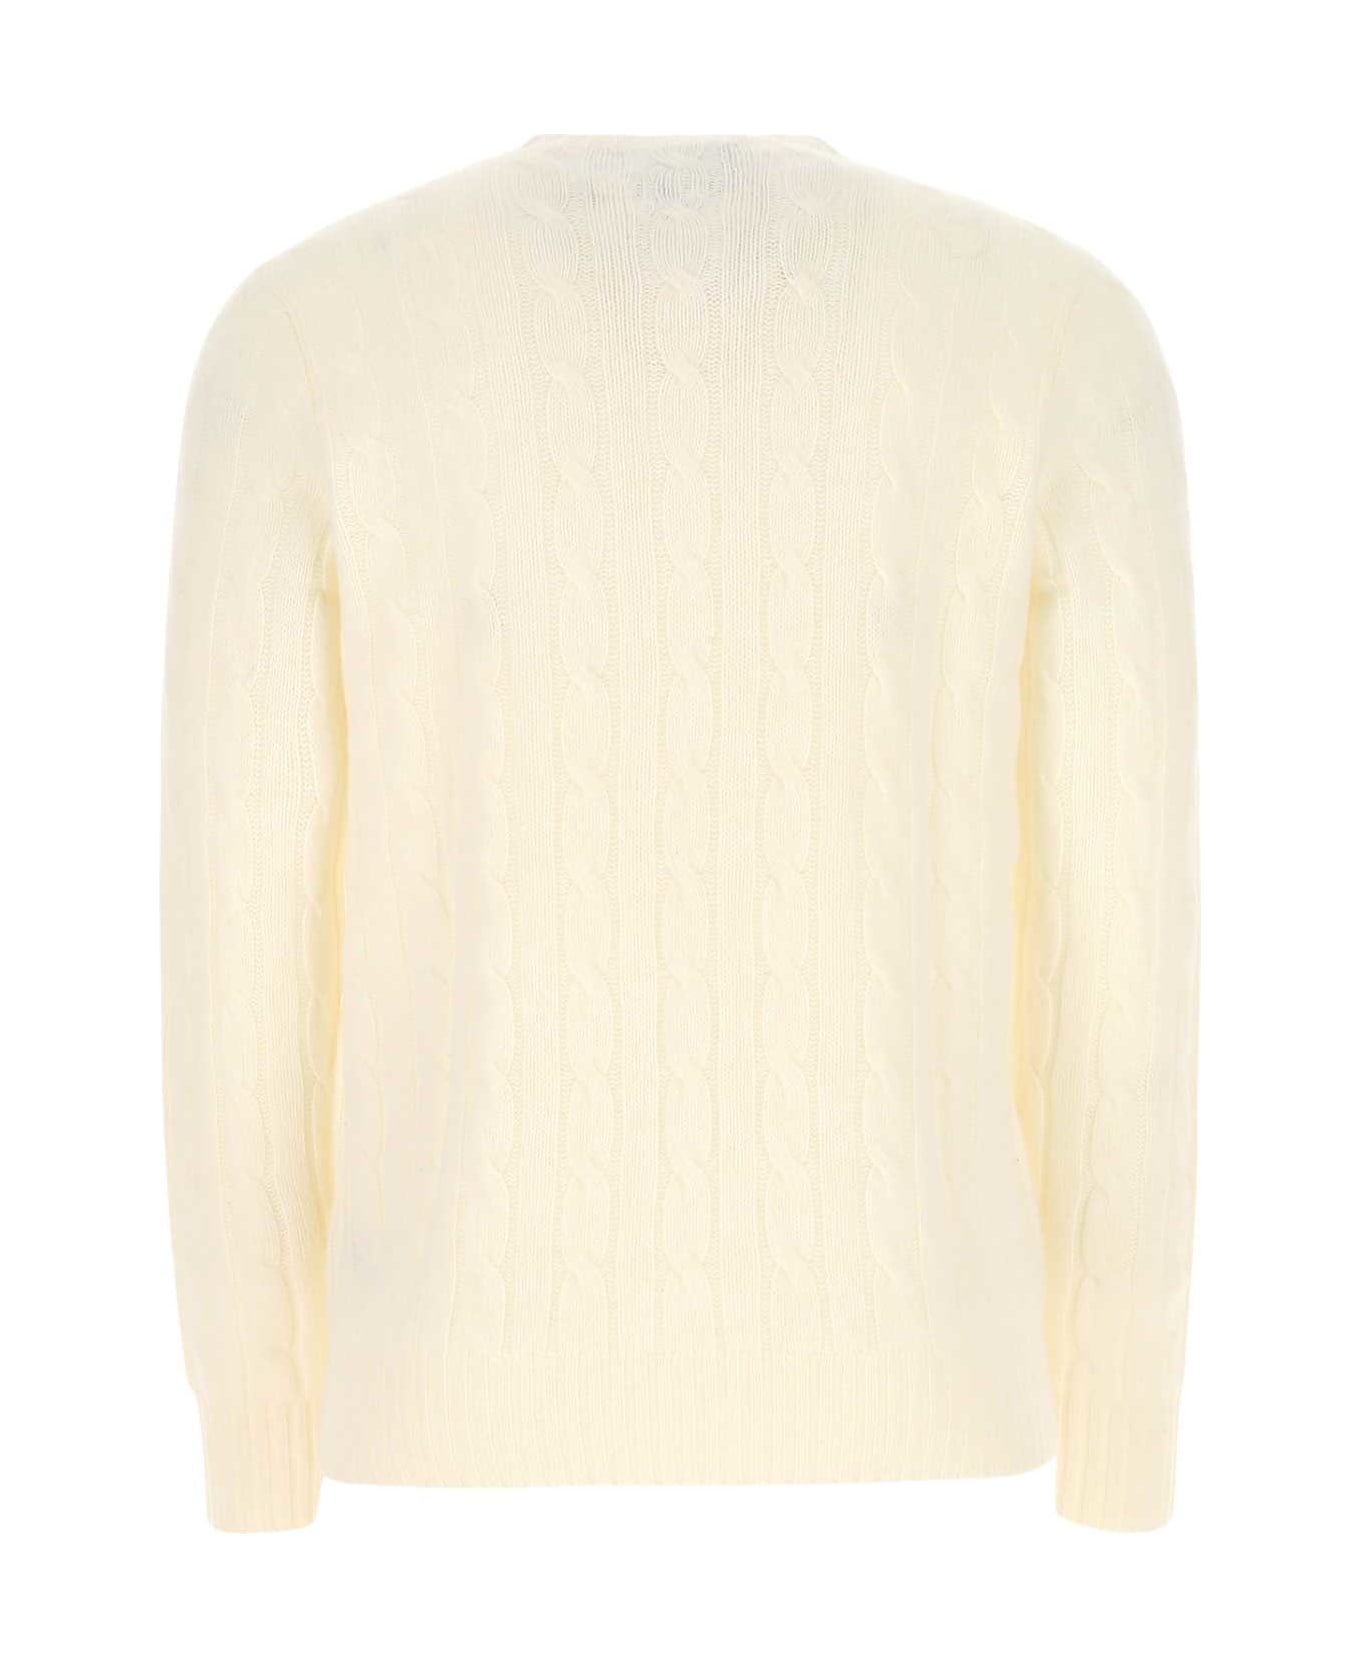 Polo Ralph Lauren Ivory Cashmere Sweater - 010